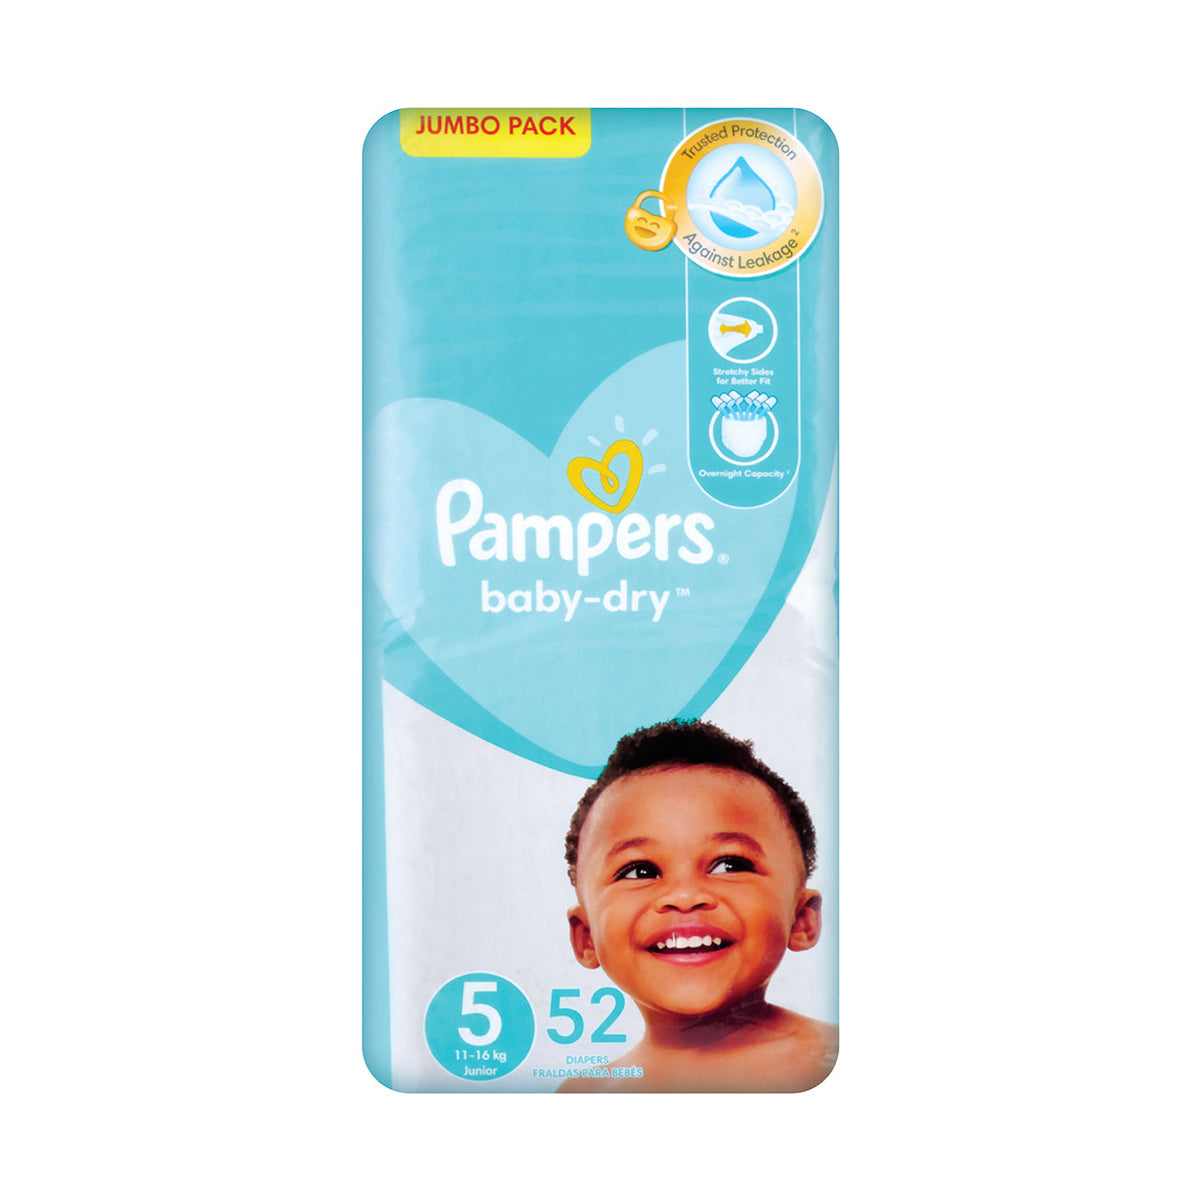 pampers premium care dlaczego.sa.inne